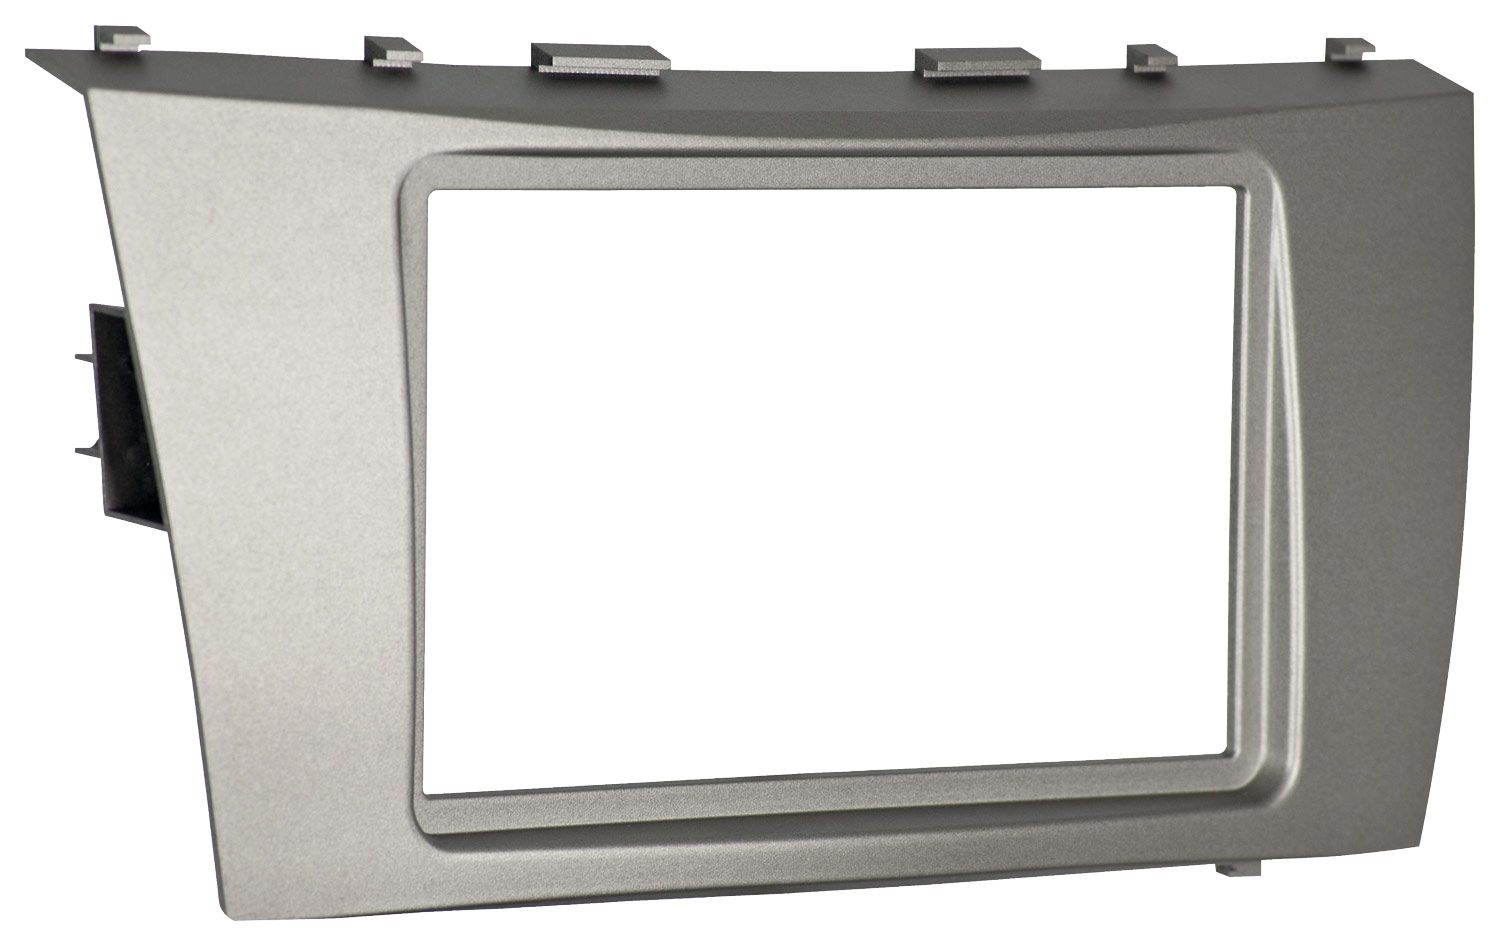 Metra Car Radio Stereo Double Din Dash Kit Panel for 2007-2011 Toyota Camry 